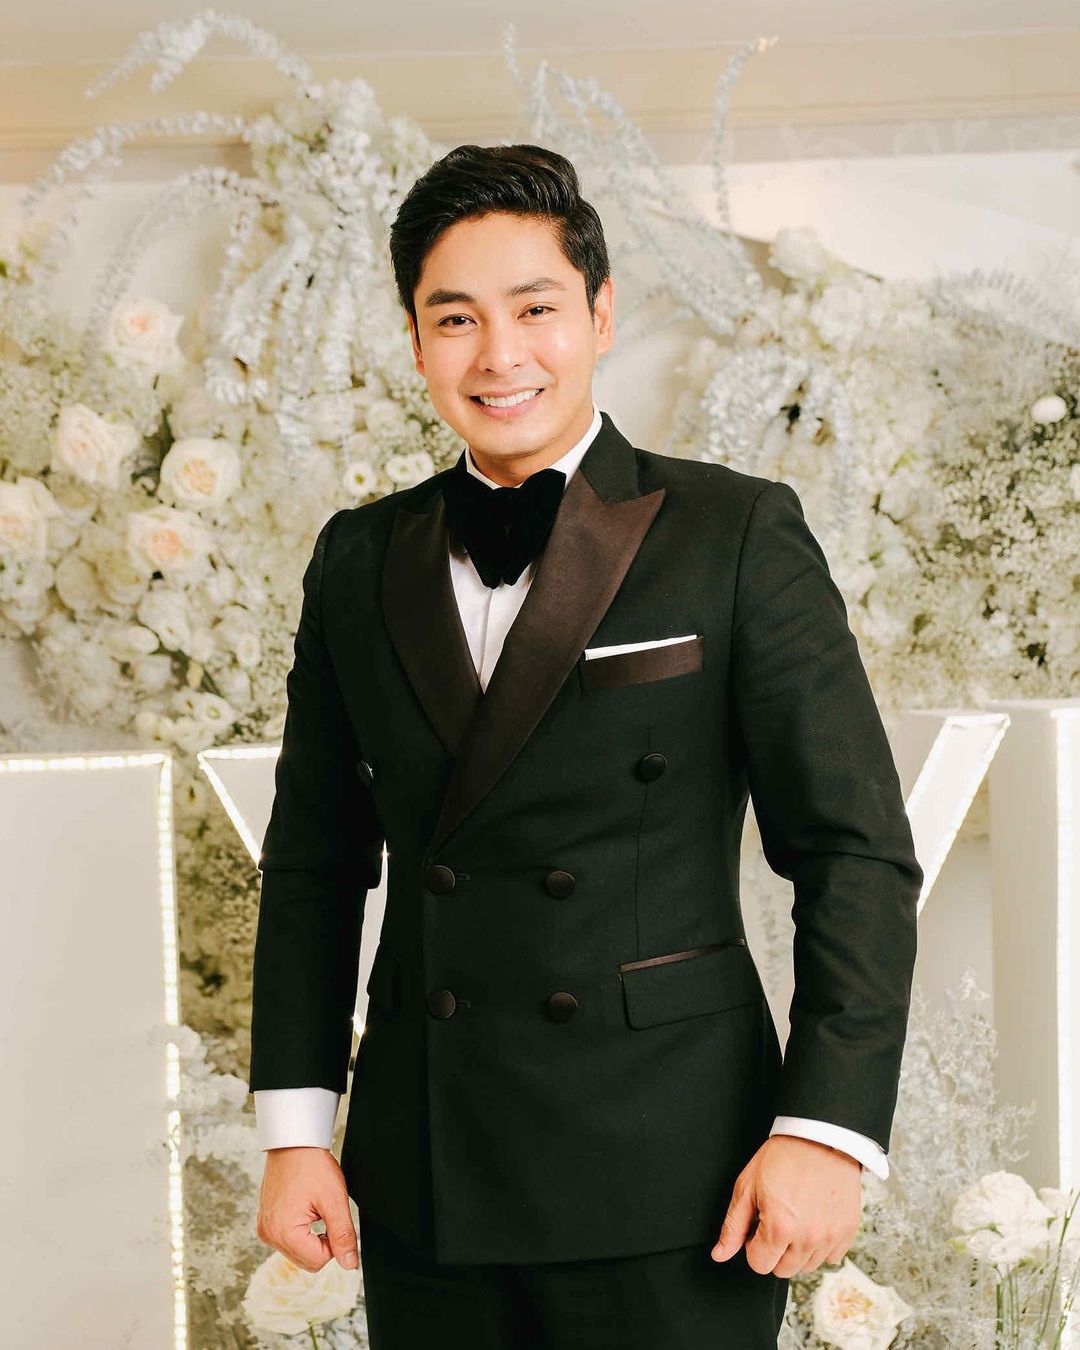 Inspiring Filipino Celebrities rags to riches - Coco Martin